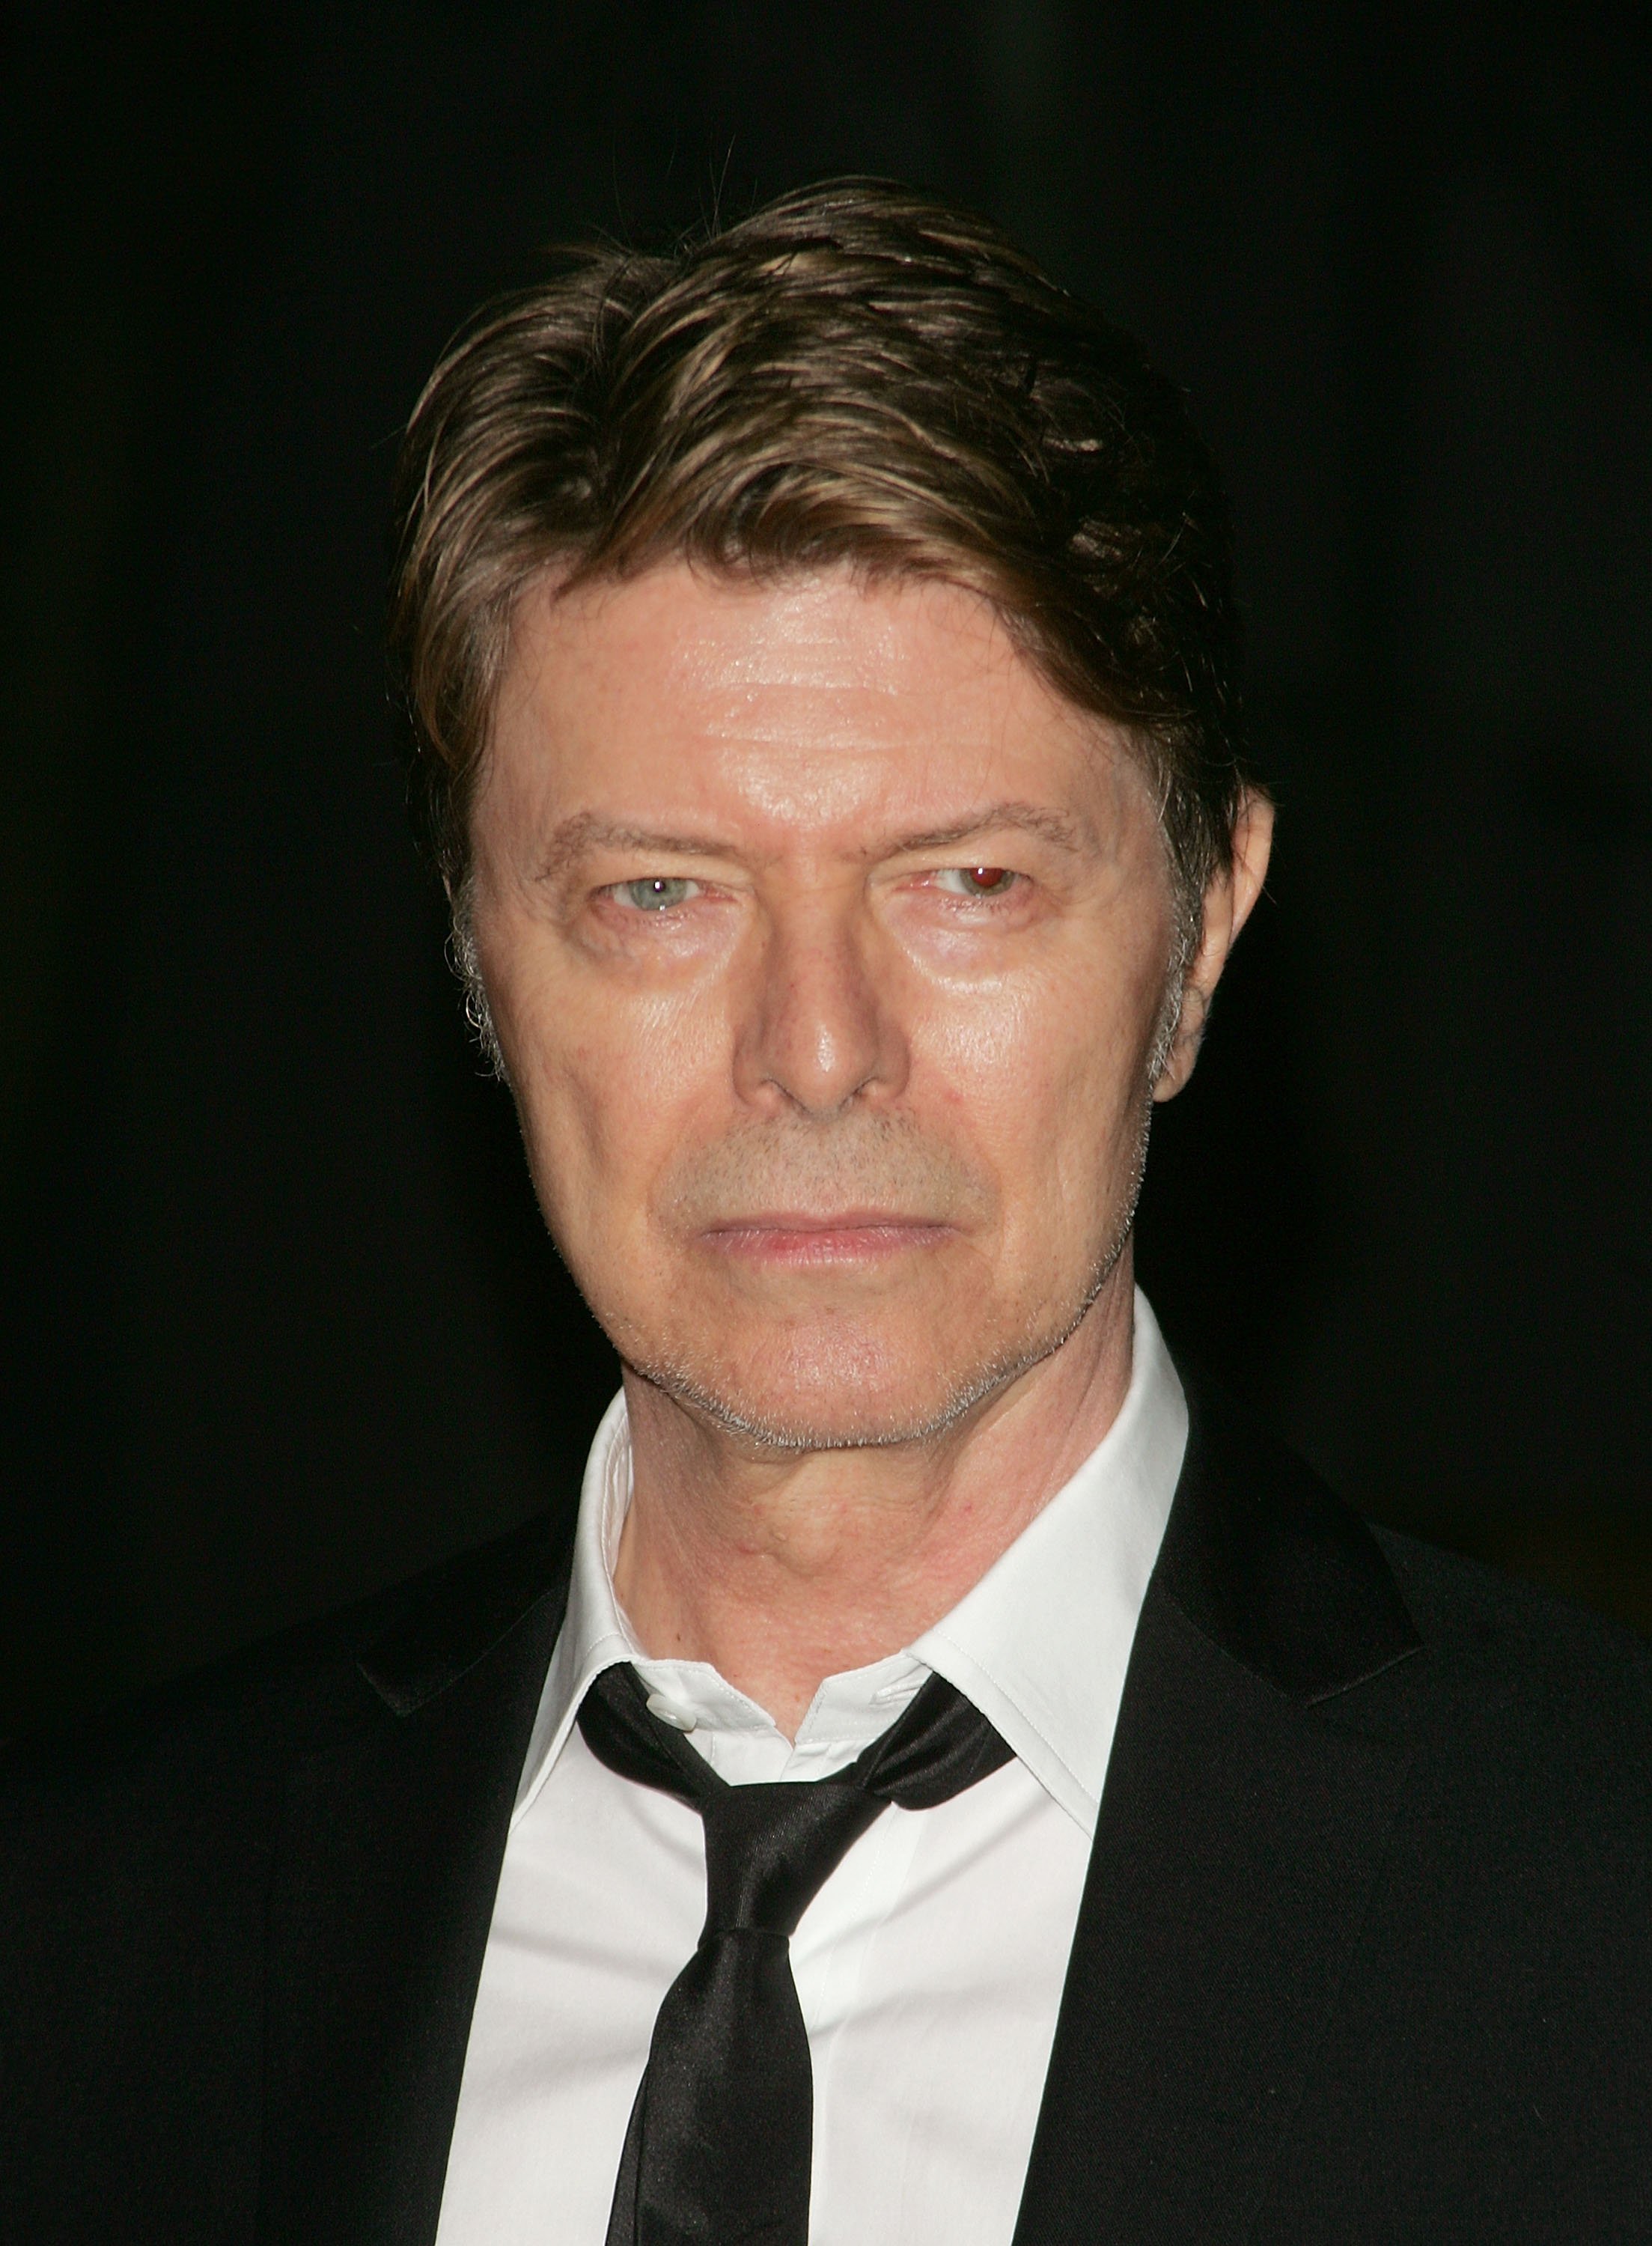 David Bowie arrives at the 7th Annual Tribeca Film Festival - Vanity Fair Party at the State Supreme Courthouse on April 22, 2008 in New York City, New York | Source: Getty Images